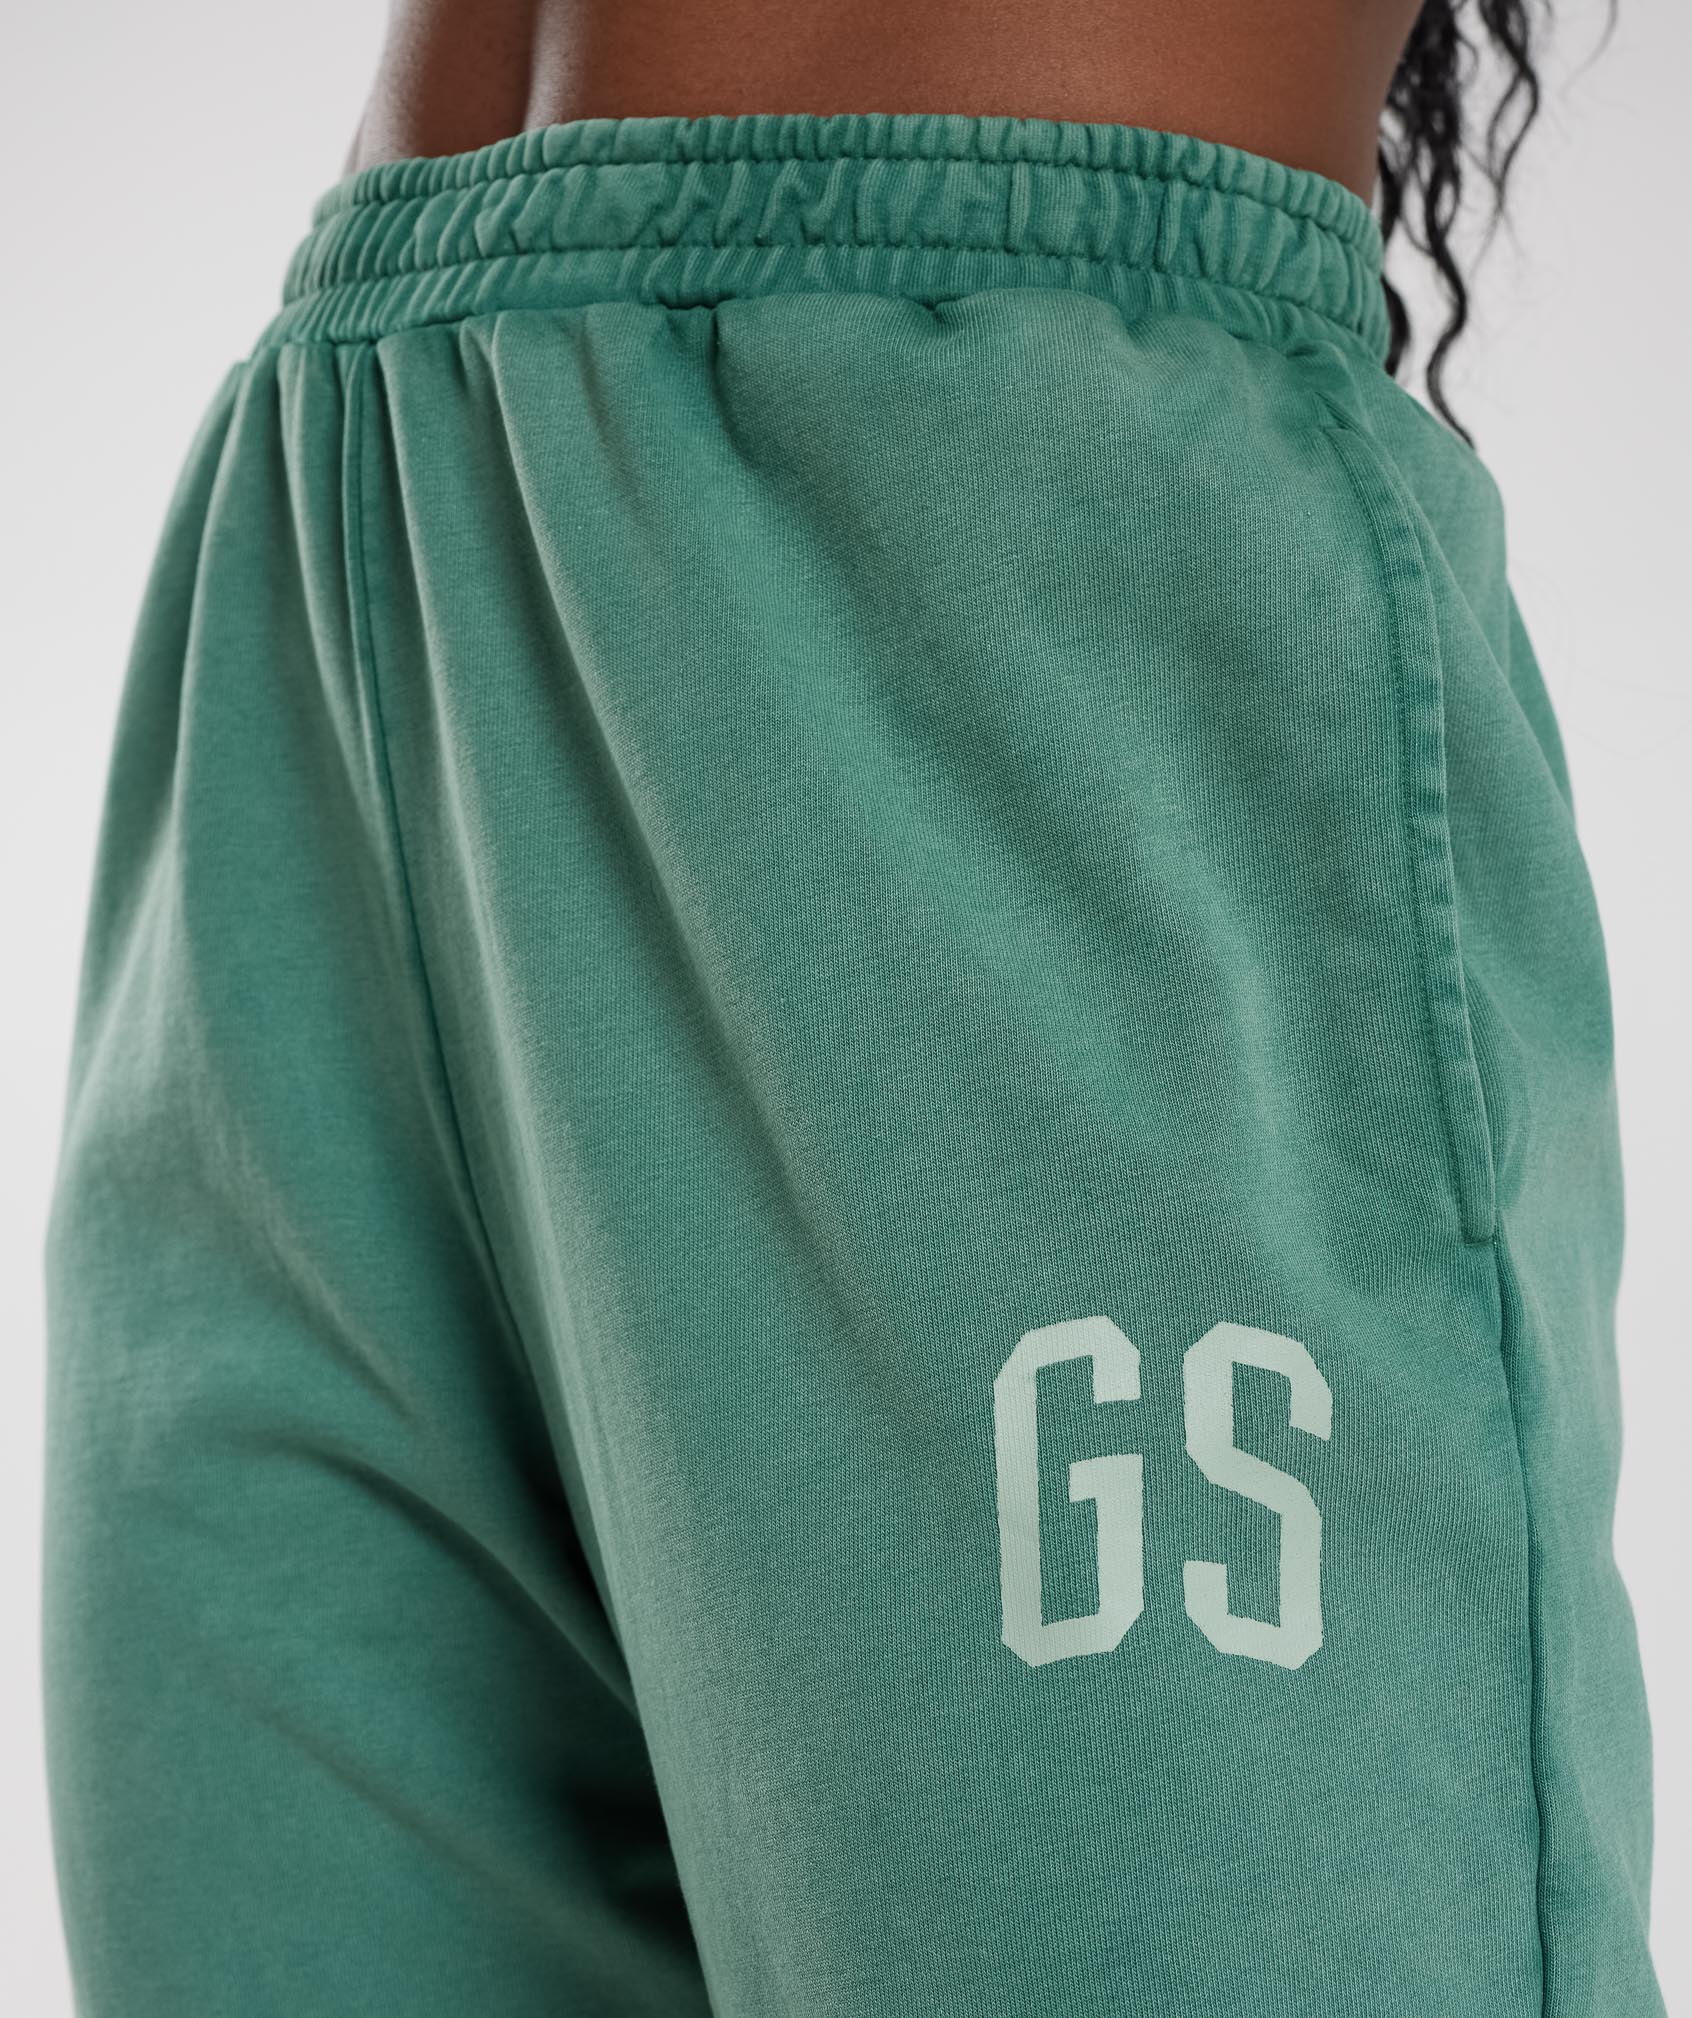 Collegiate Joggers in Ink Teal - view 5